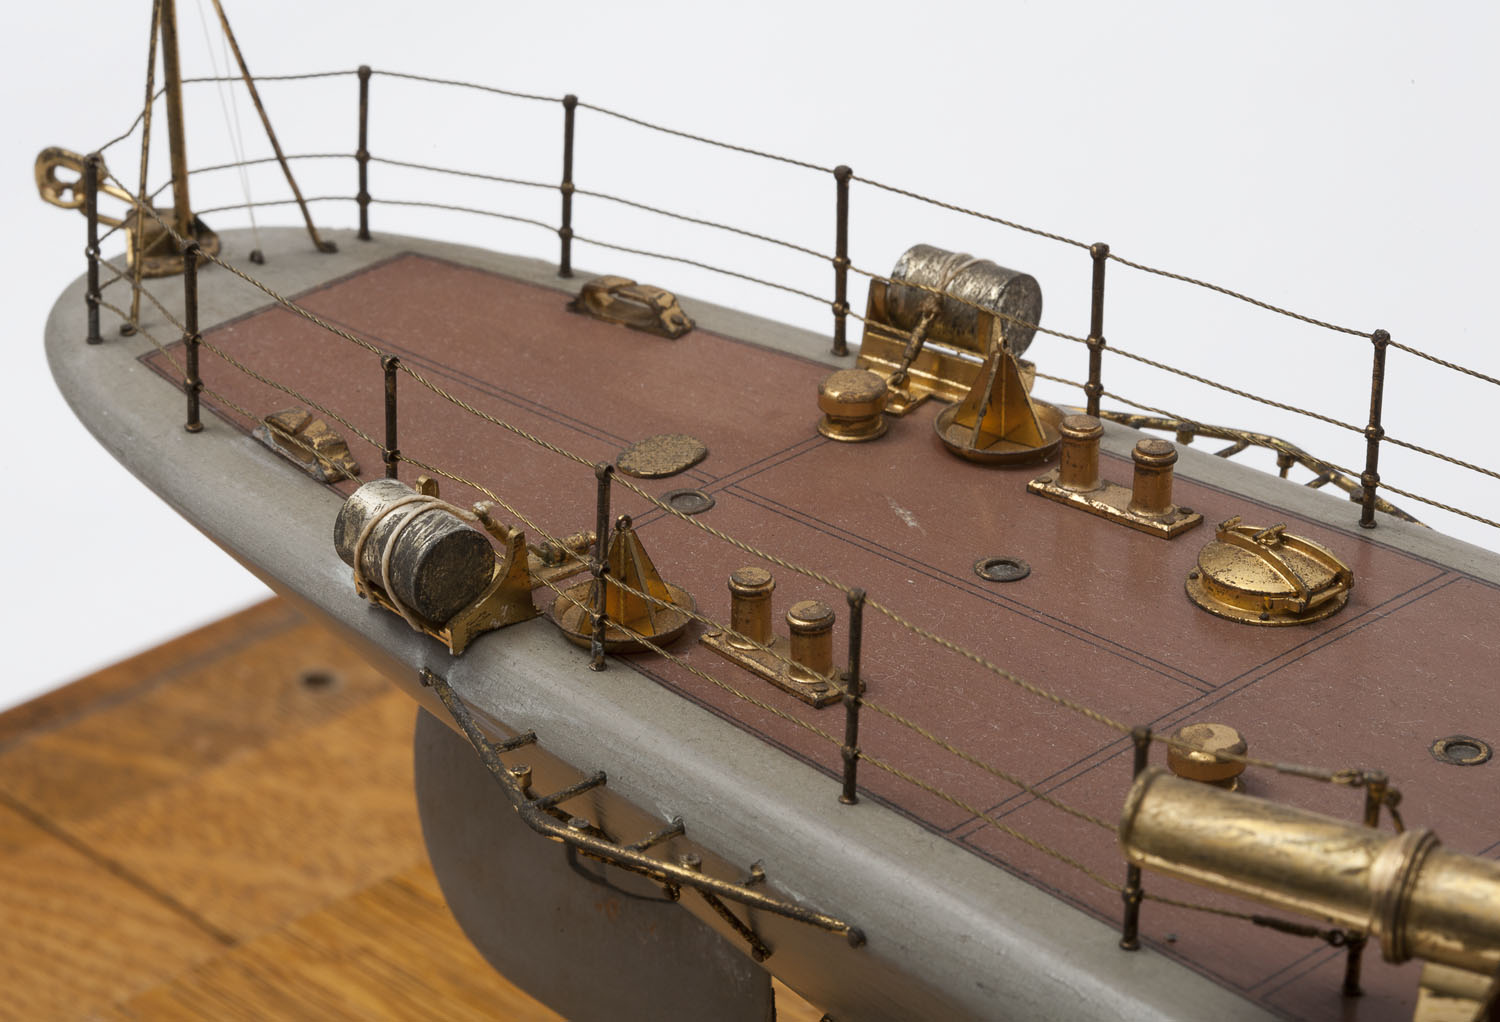 Port and starboard racks with depth charges and release mechanisms